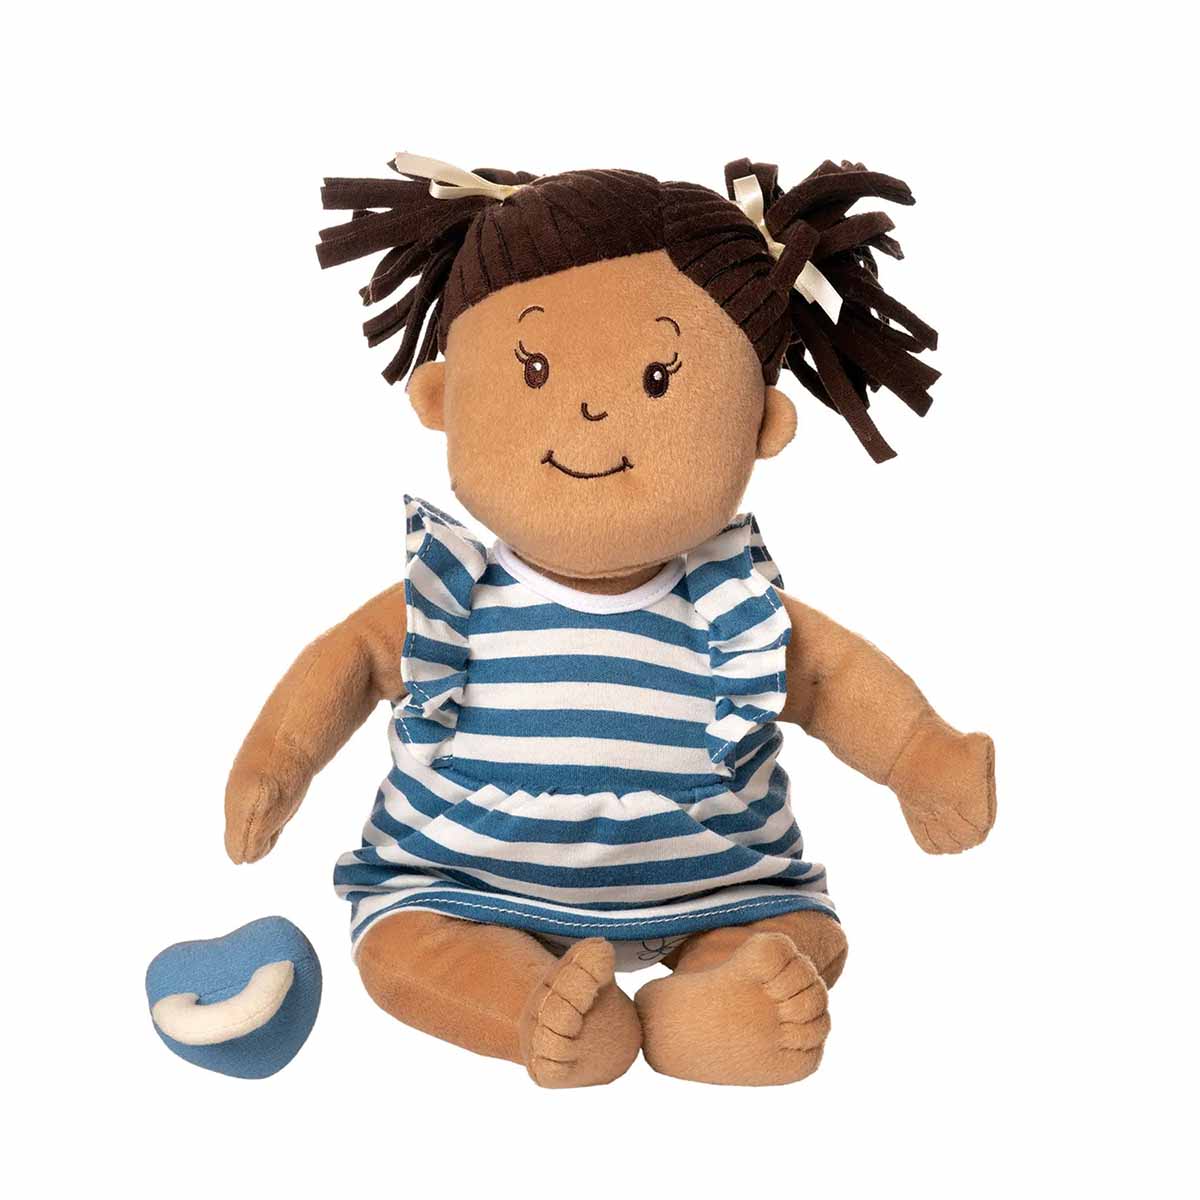 Plush Baby Stella Beige doll with brown pigtails wearing a blue and white striped dress. Blue magnetic pacifier is beside doll. Doll is 15 inches and is sitting facing forwards.